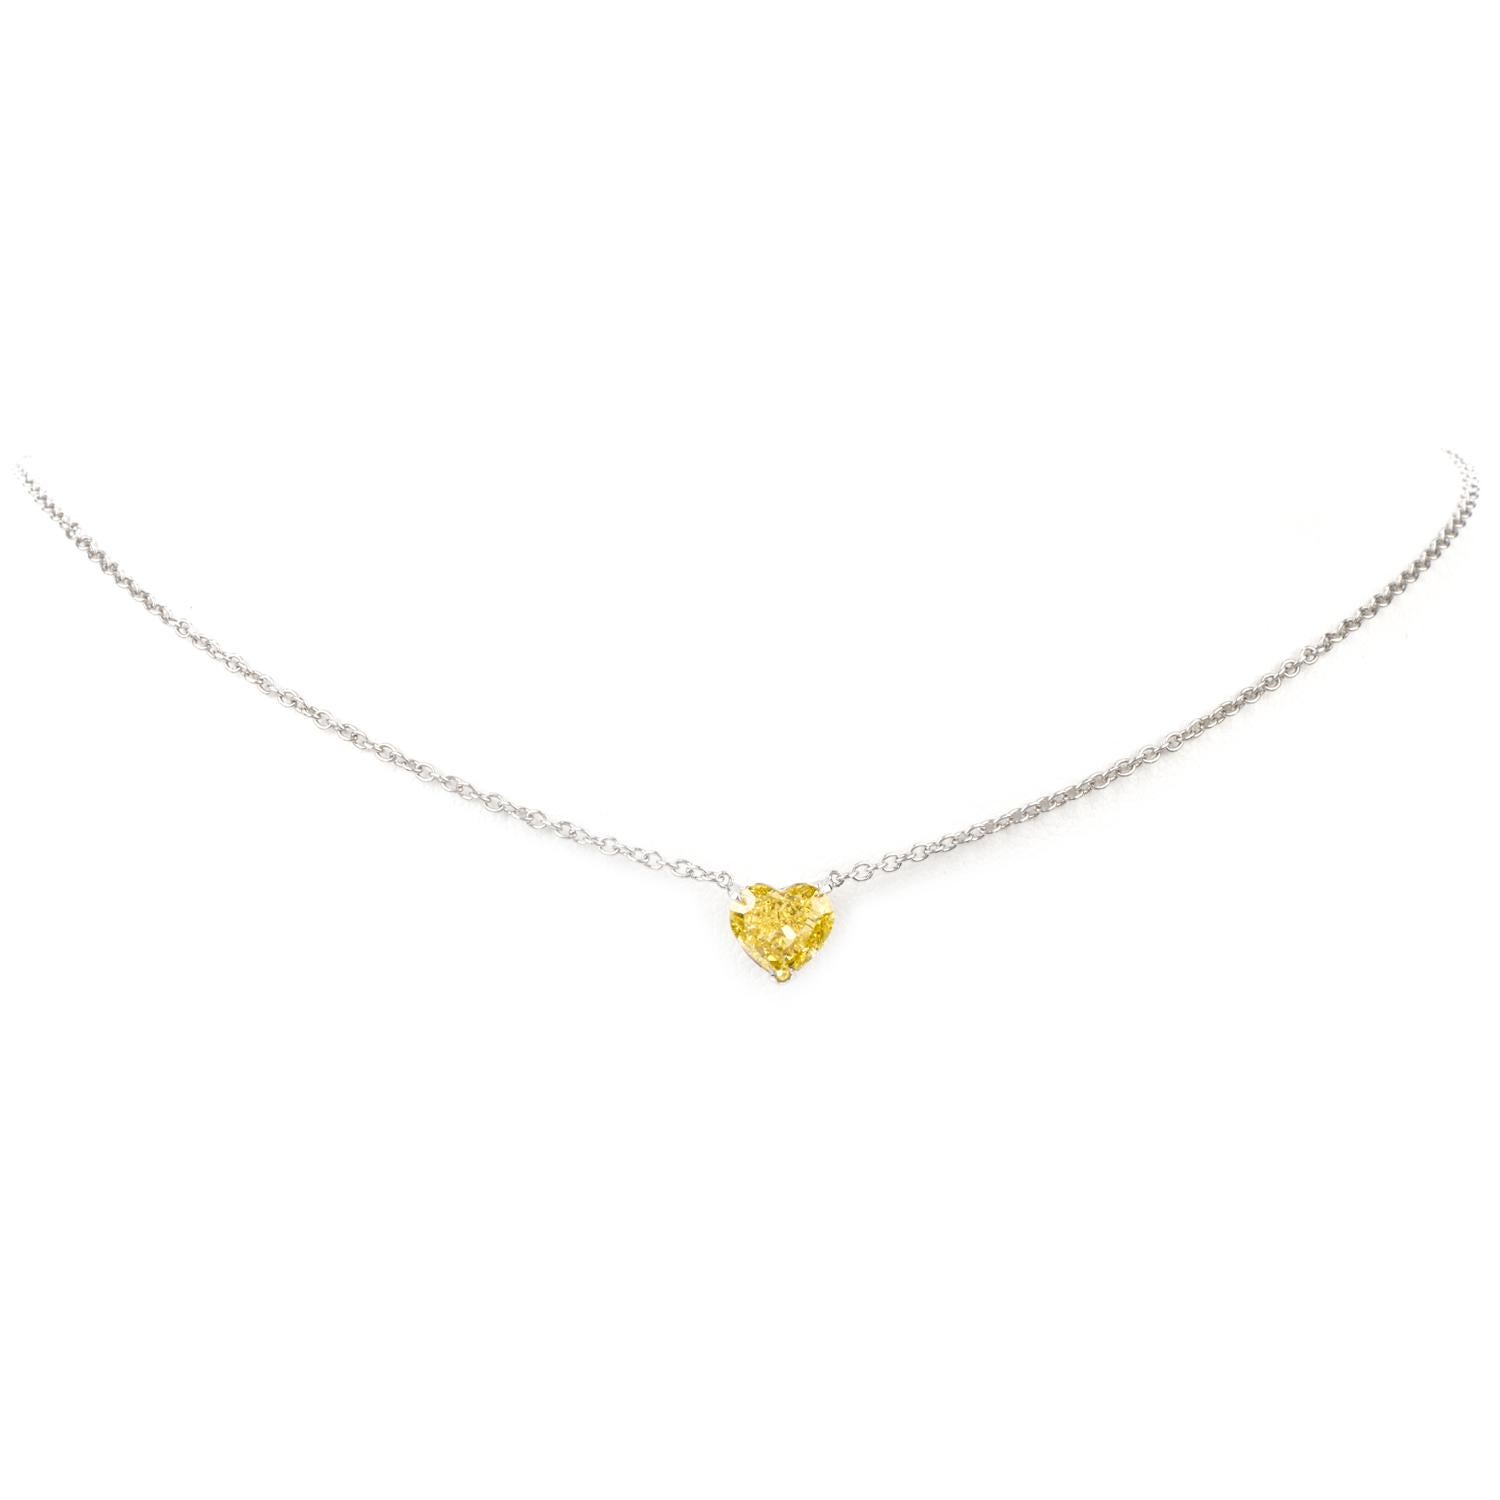 This is an extraordinary expression of love!

Boasting a Natural Fancy Intense Yellow Heart shaped Gia

Certified diamond, this necklace pops with vibrant color.

Attached stationary to the center of this 15.5 inch cable chain.

Heart Diamond